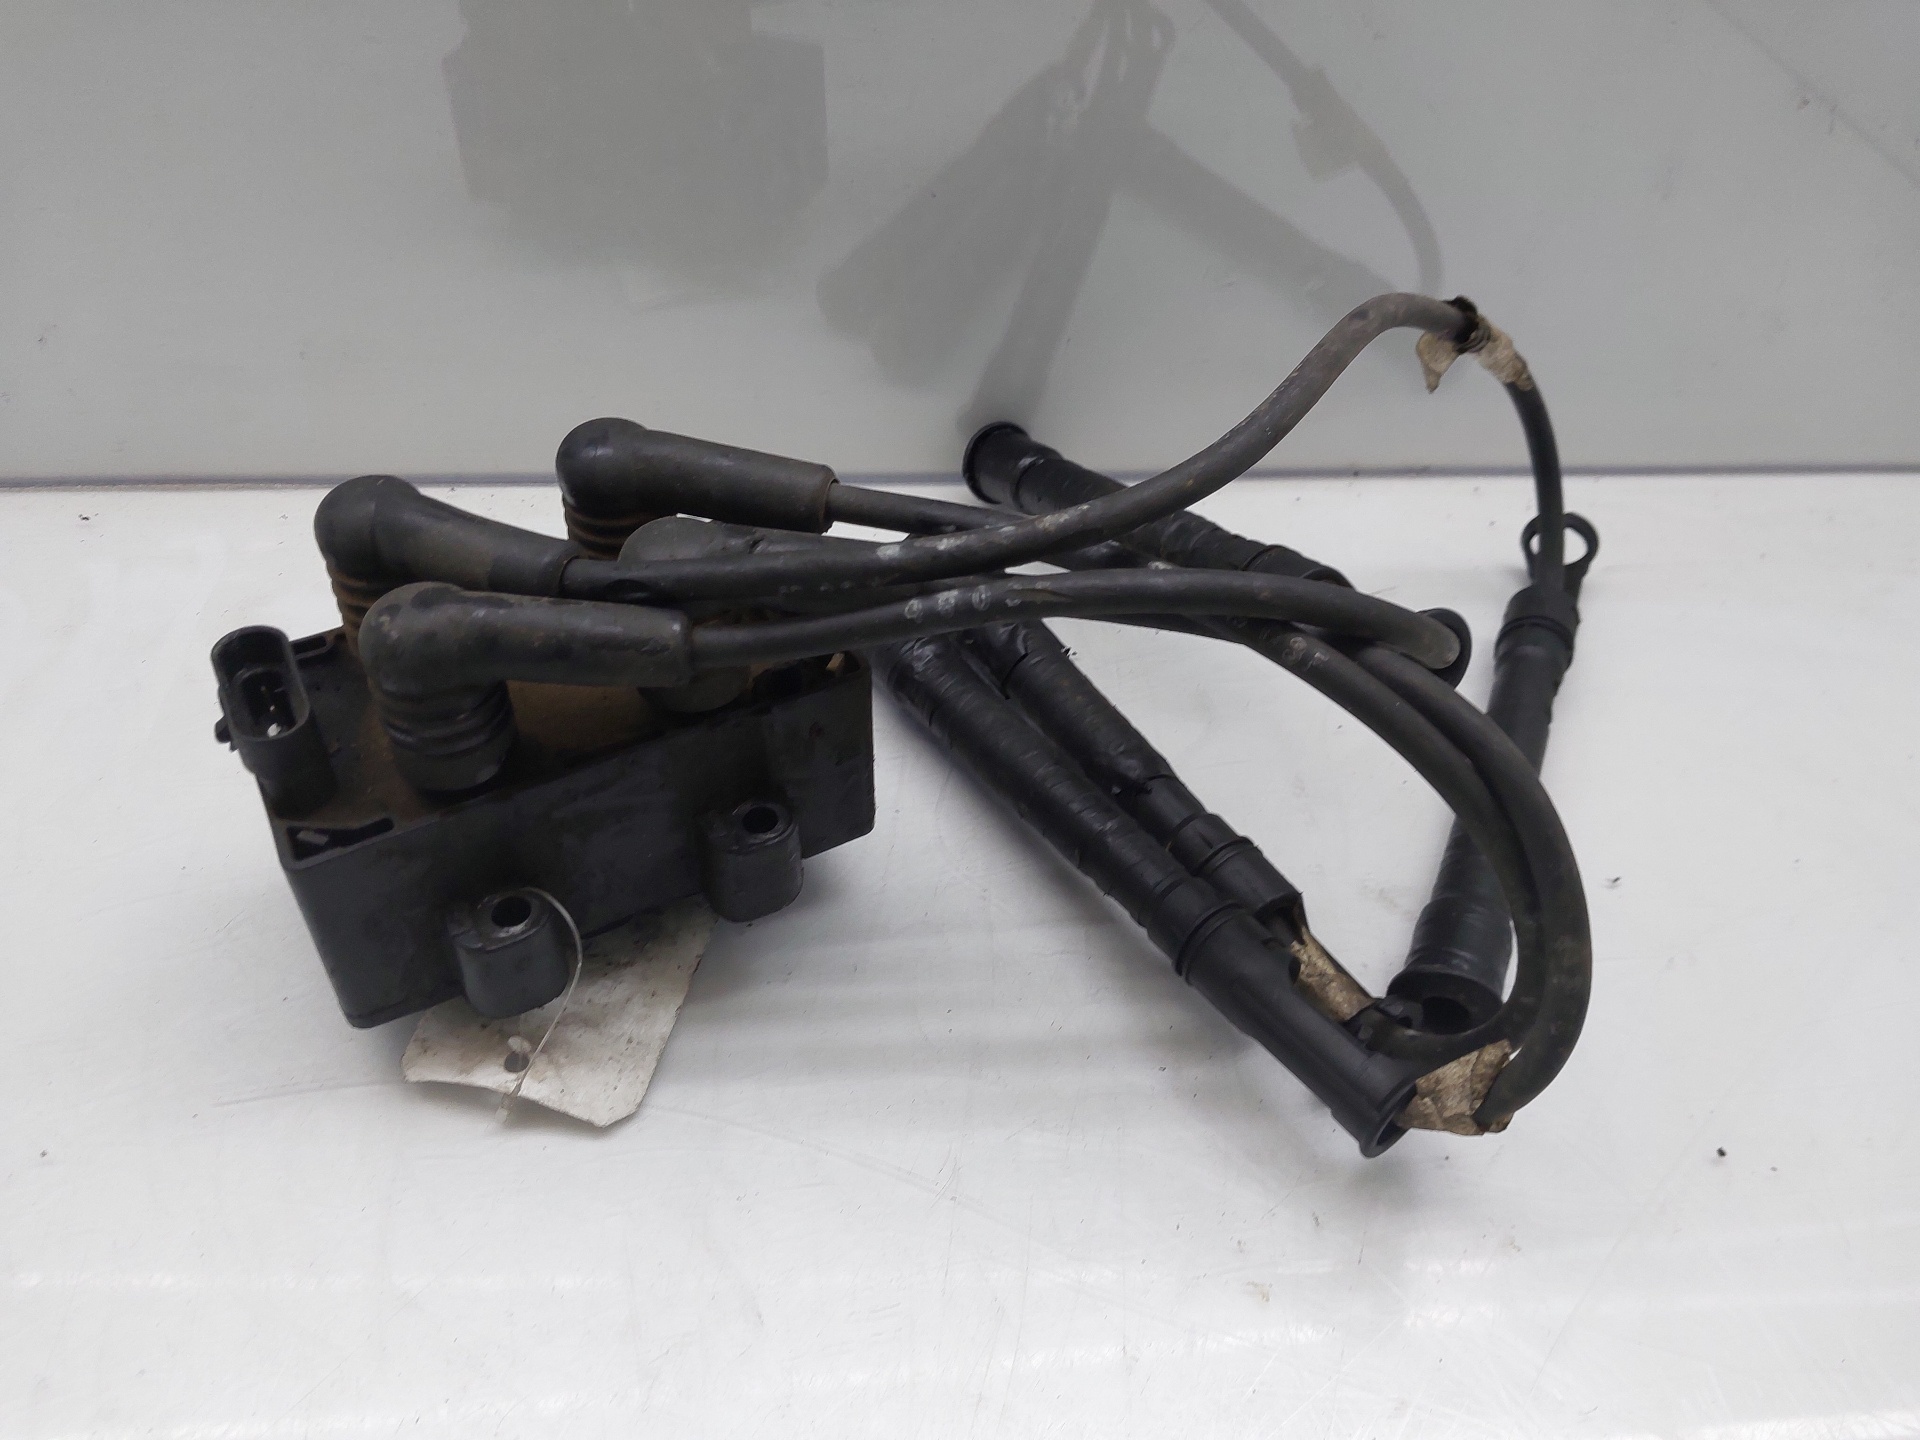 NISSAN High Voltage Ignition Coil 7700873701 22612815